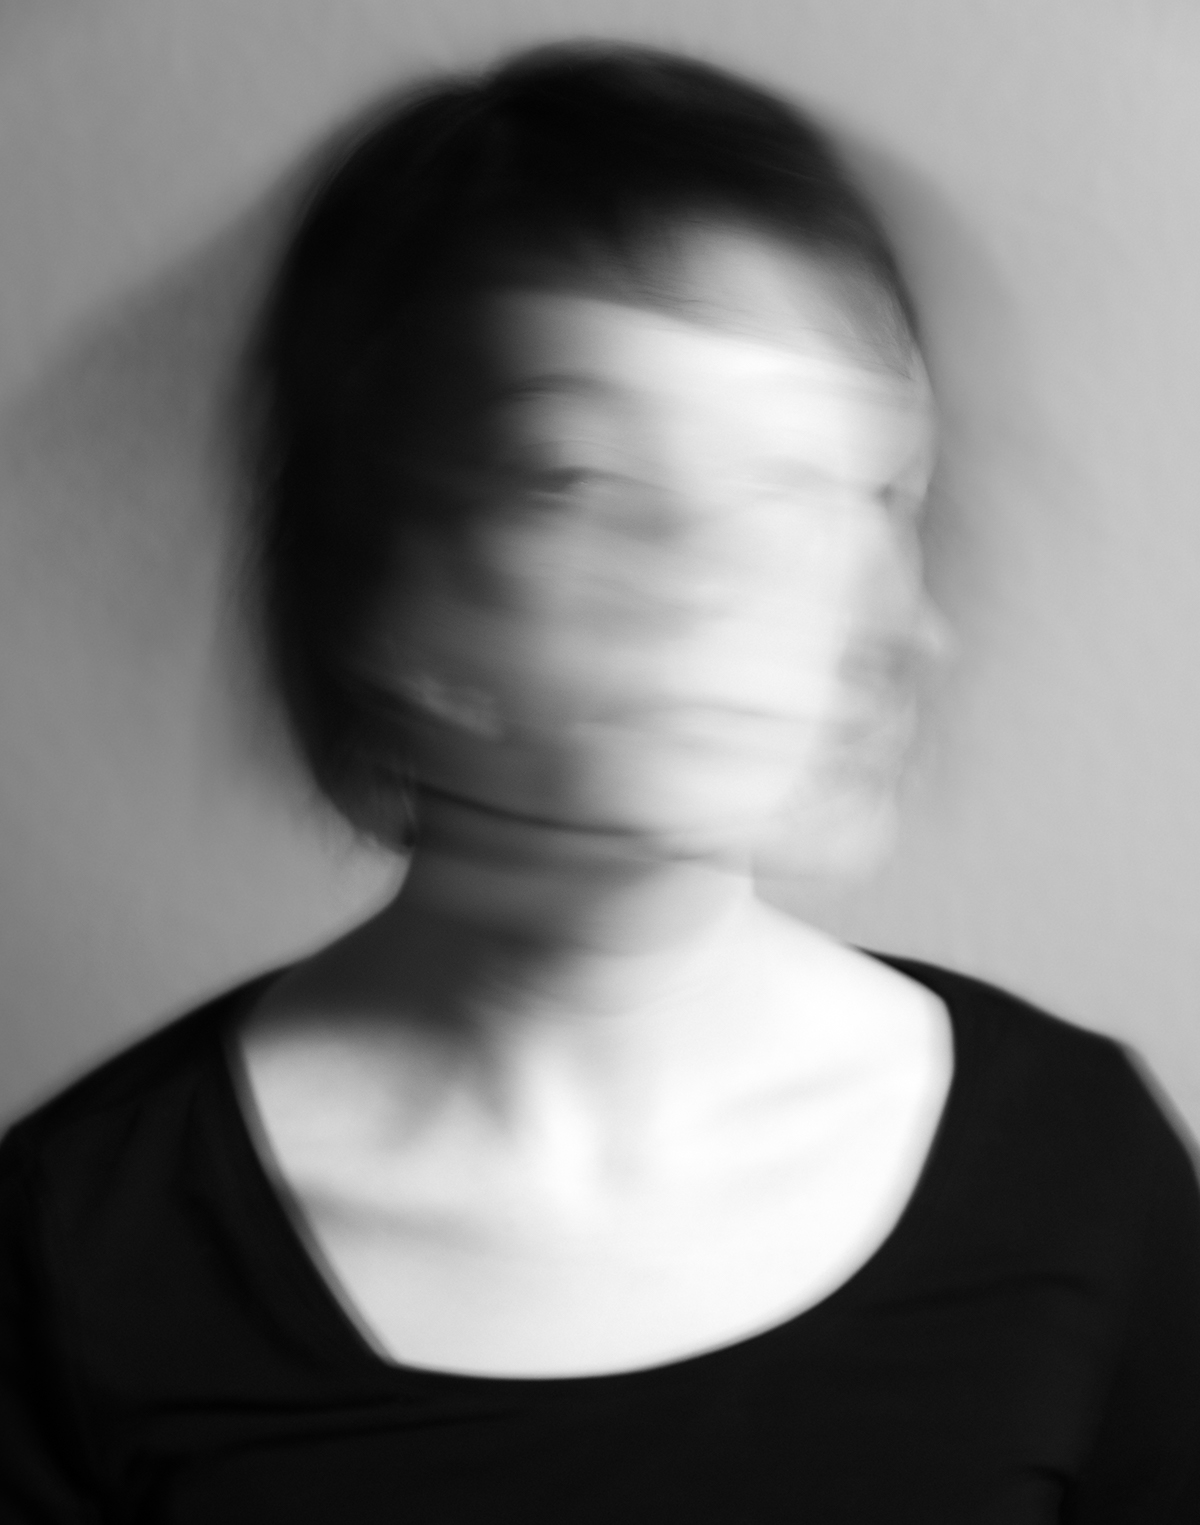 portrait blurred black and white Time Exposure motion blur